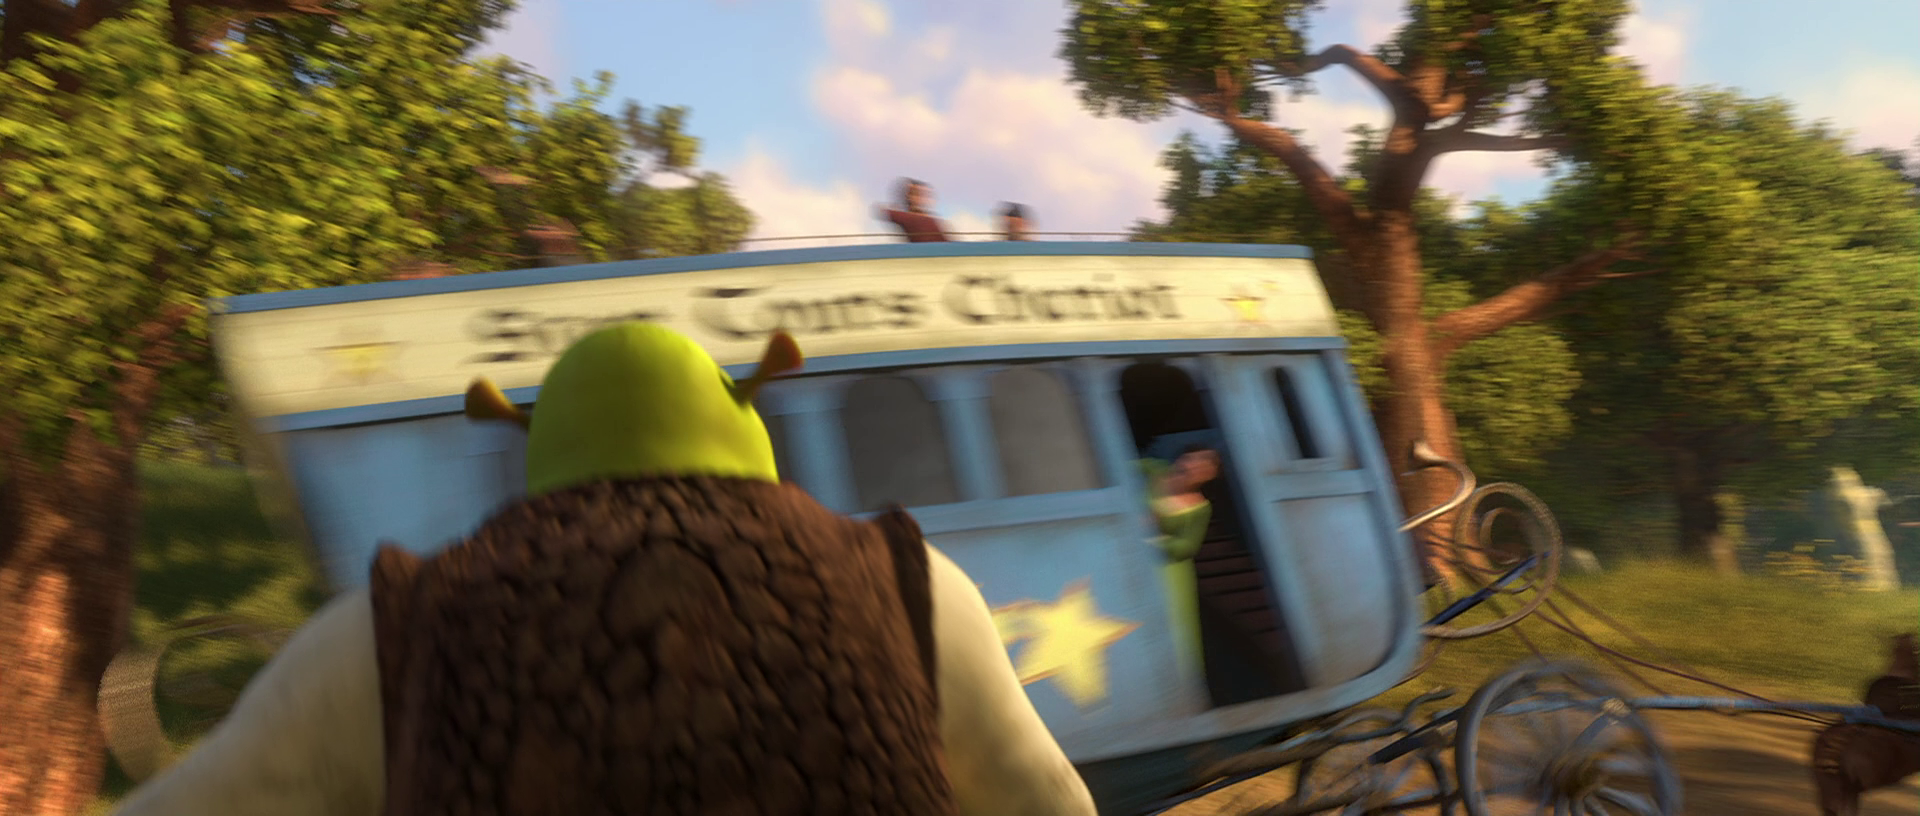 ʷ4 Shrek.Forever.After.2010.1080p.BluRay.x264.DTS-FGT 7.16GB-5.png